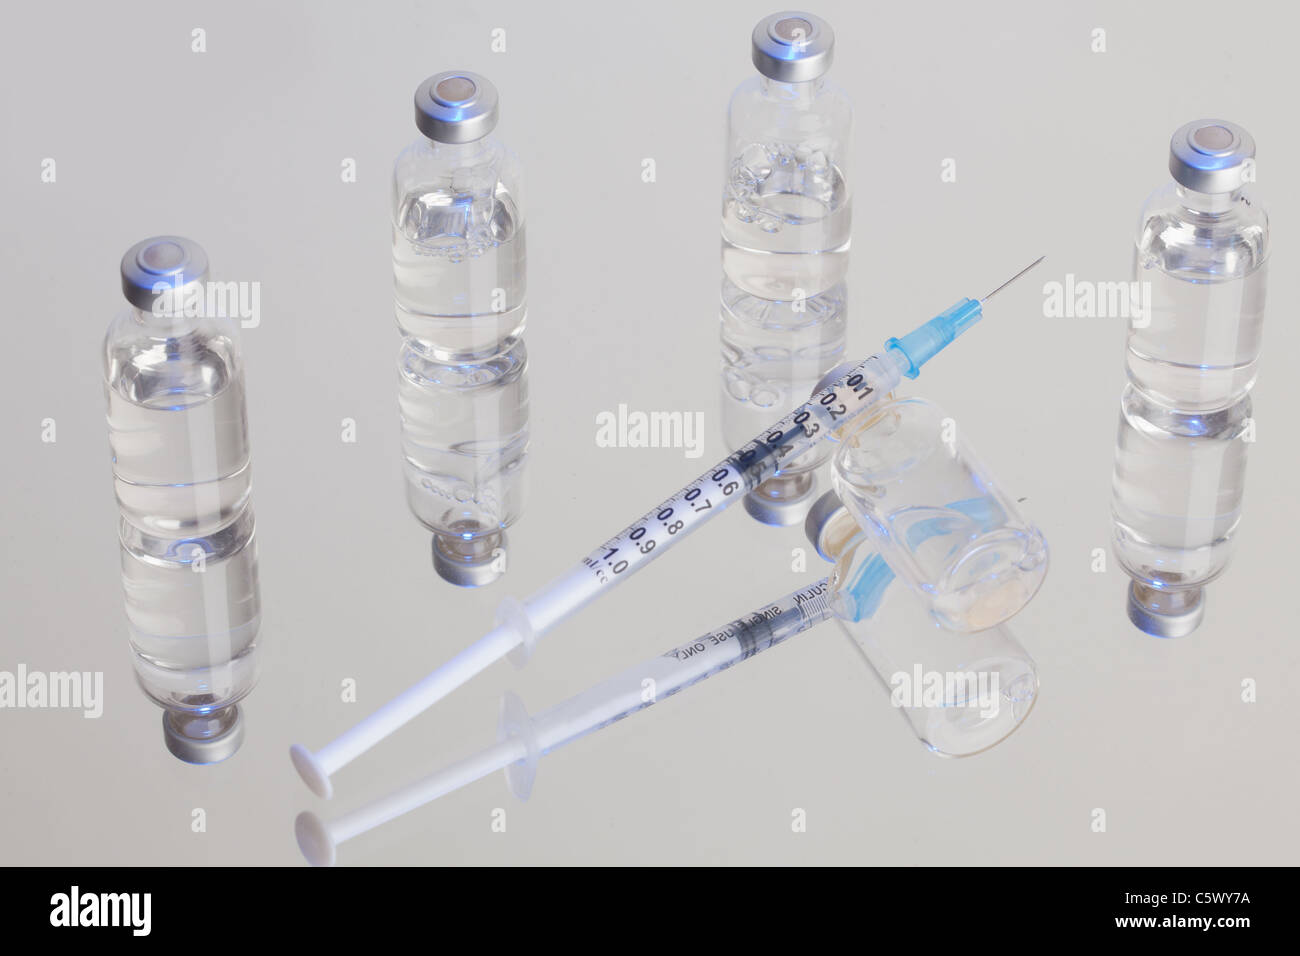 Medical Vials with Syringe Stock Photo